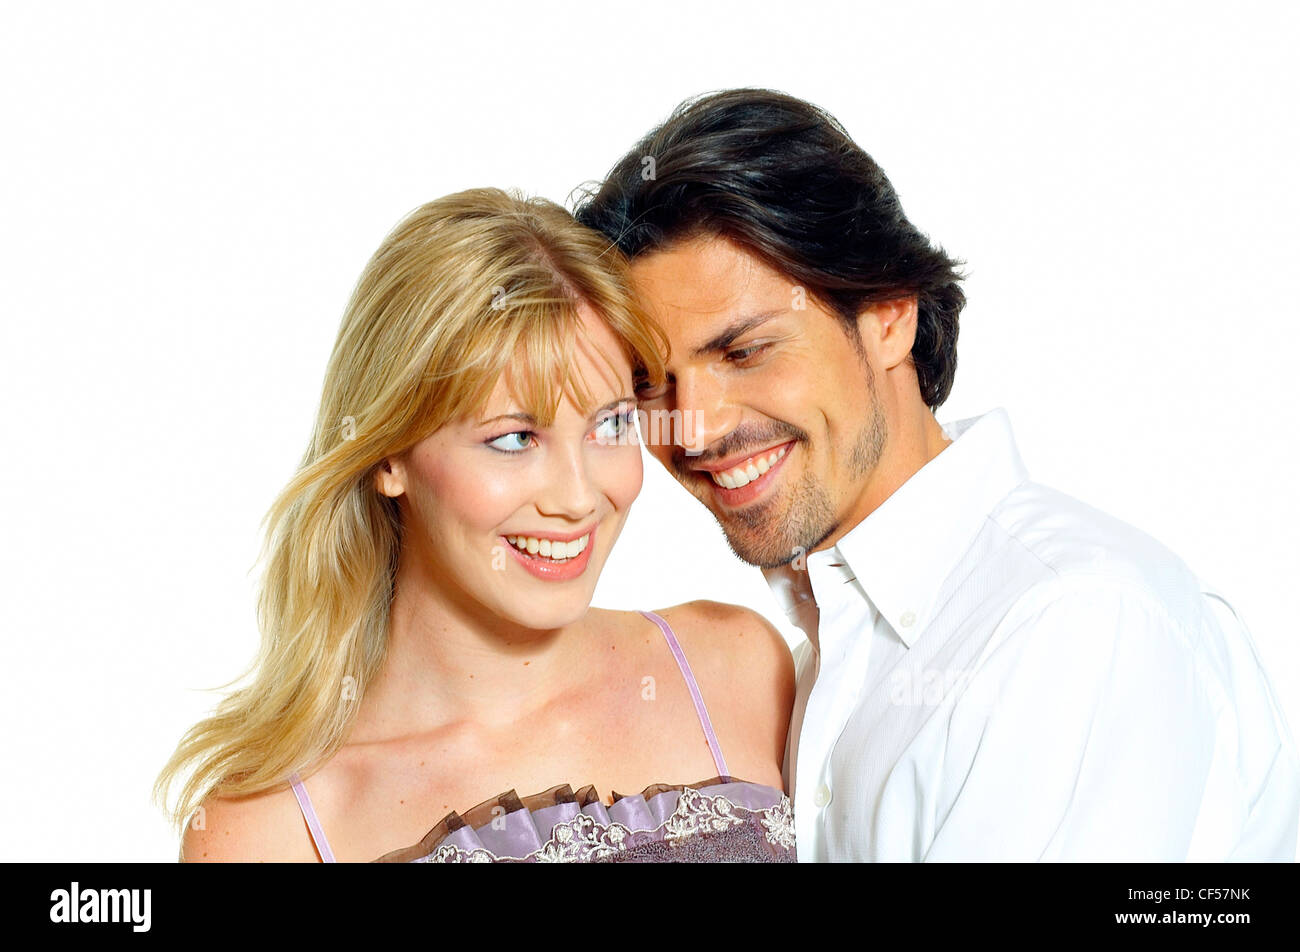 Female long blonde hair wearing lilac sleeveless top standing against male dark hair wearing white shirt looking at her, Stock Photo